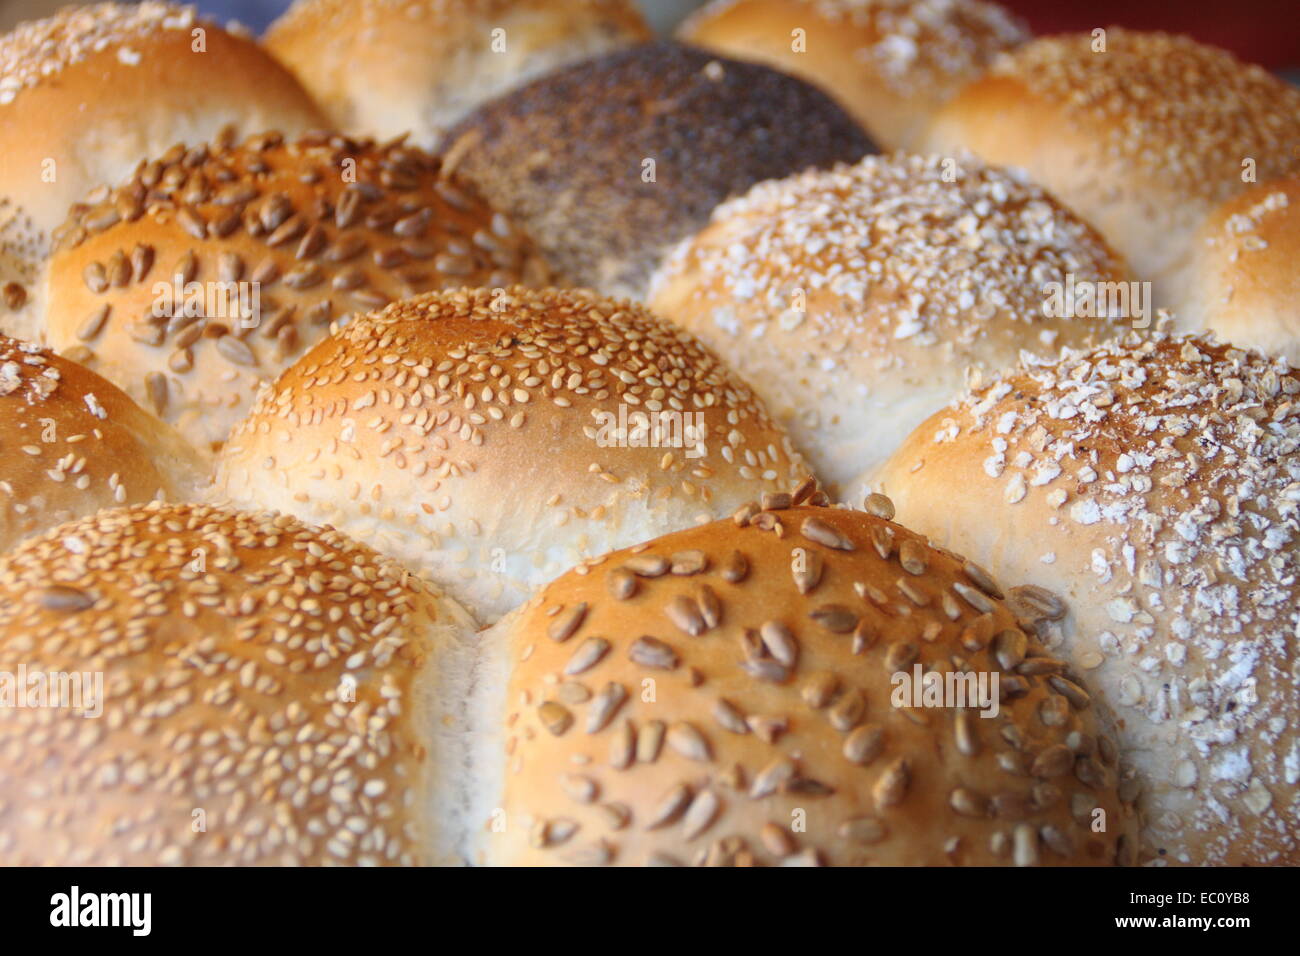 Rustic, freshly baked seeded bread rolls displayed for sale, UK Stock Photo